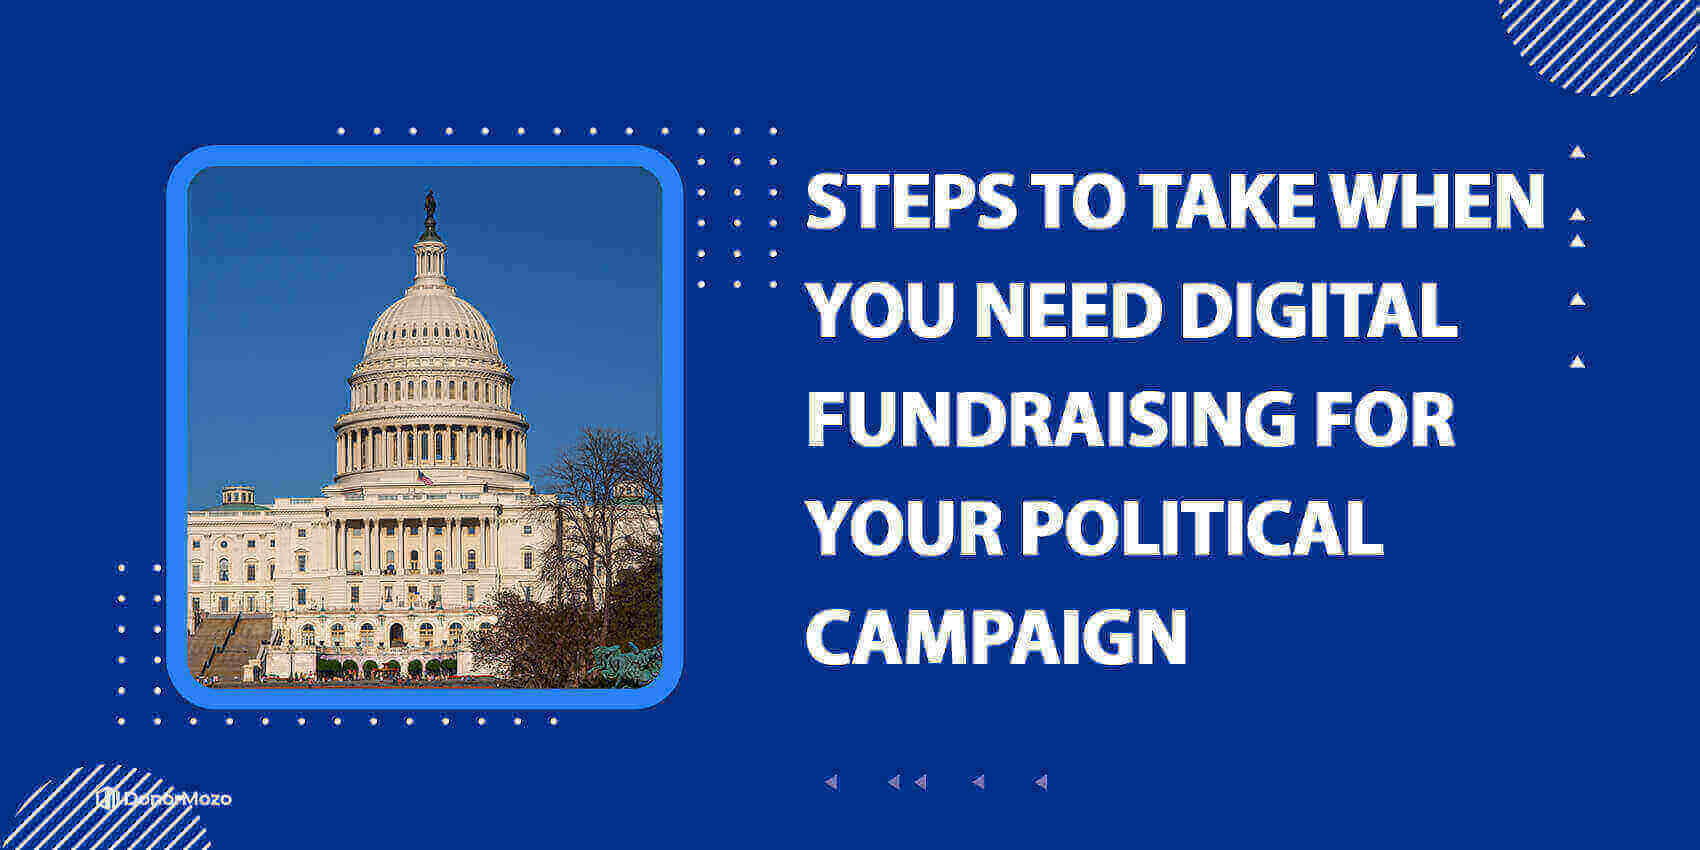 Steps to Take When You Need Digital Fundraising for Your Political Campaign